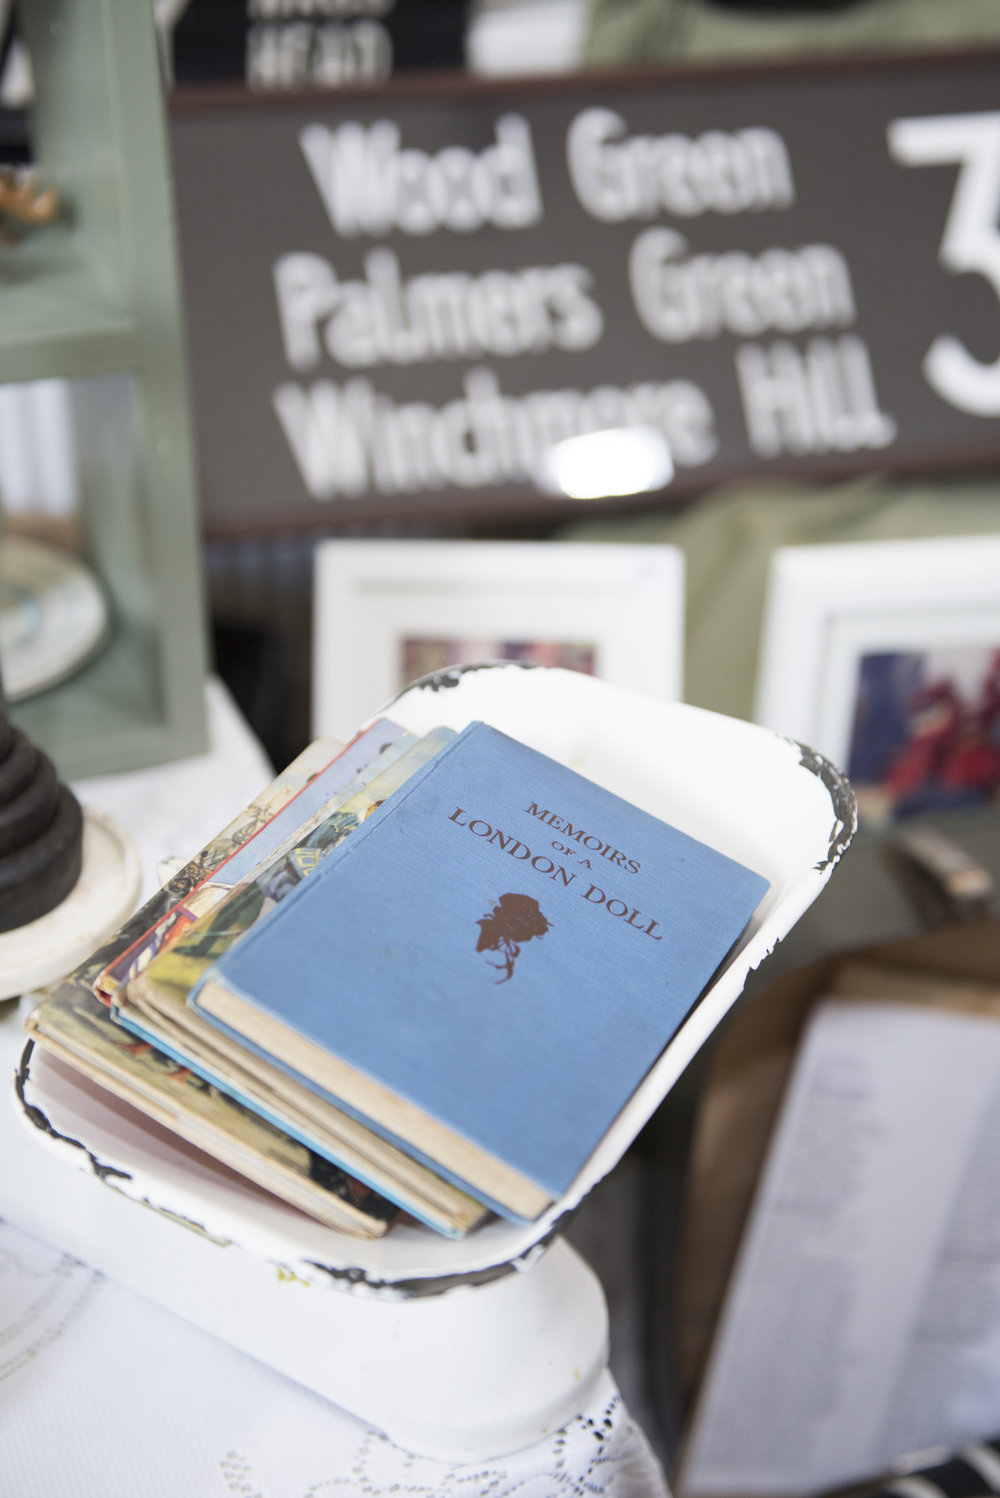  Vintage books tempting shoppers on the stall of @so_sally_vintage as well as her ever popular bus blinds 